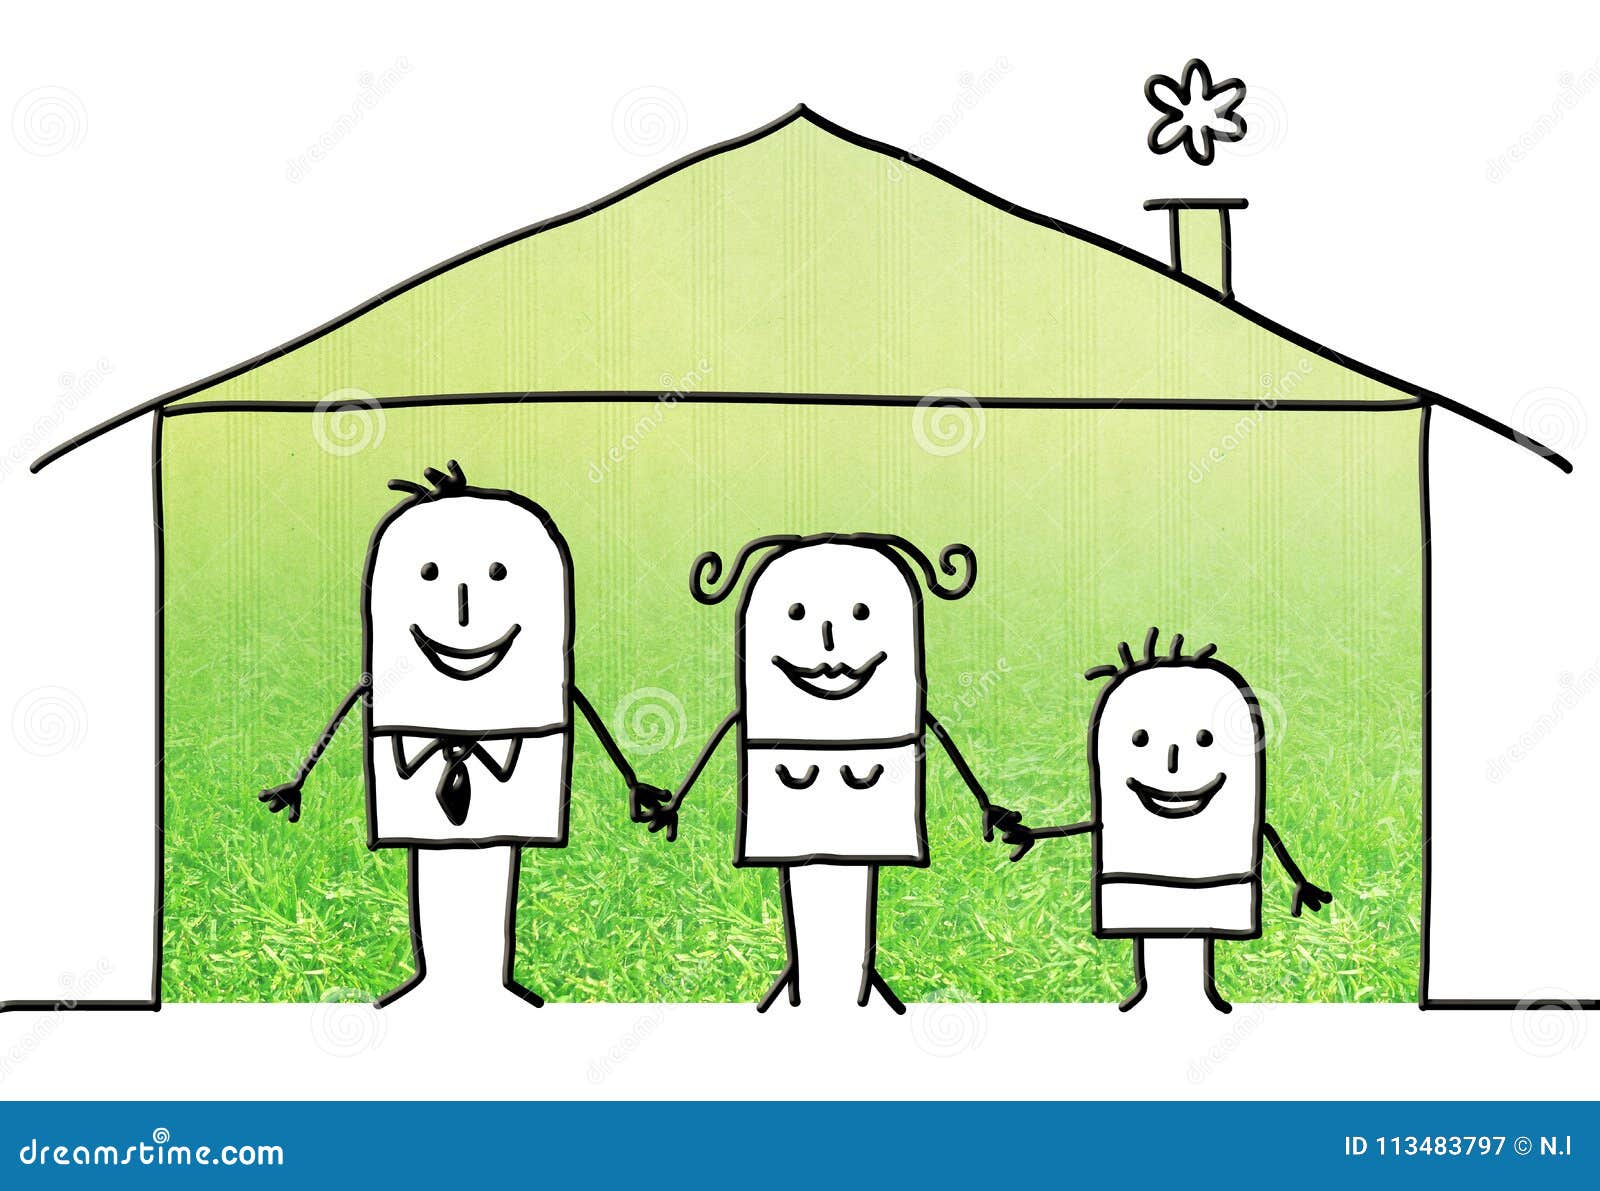 Cartoon family at home stock illustration. Illustration of home - 113483797